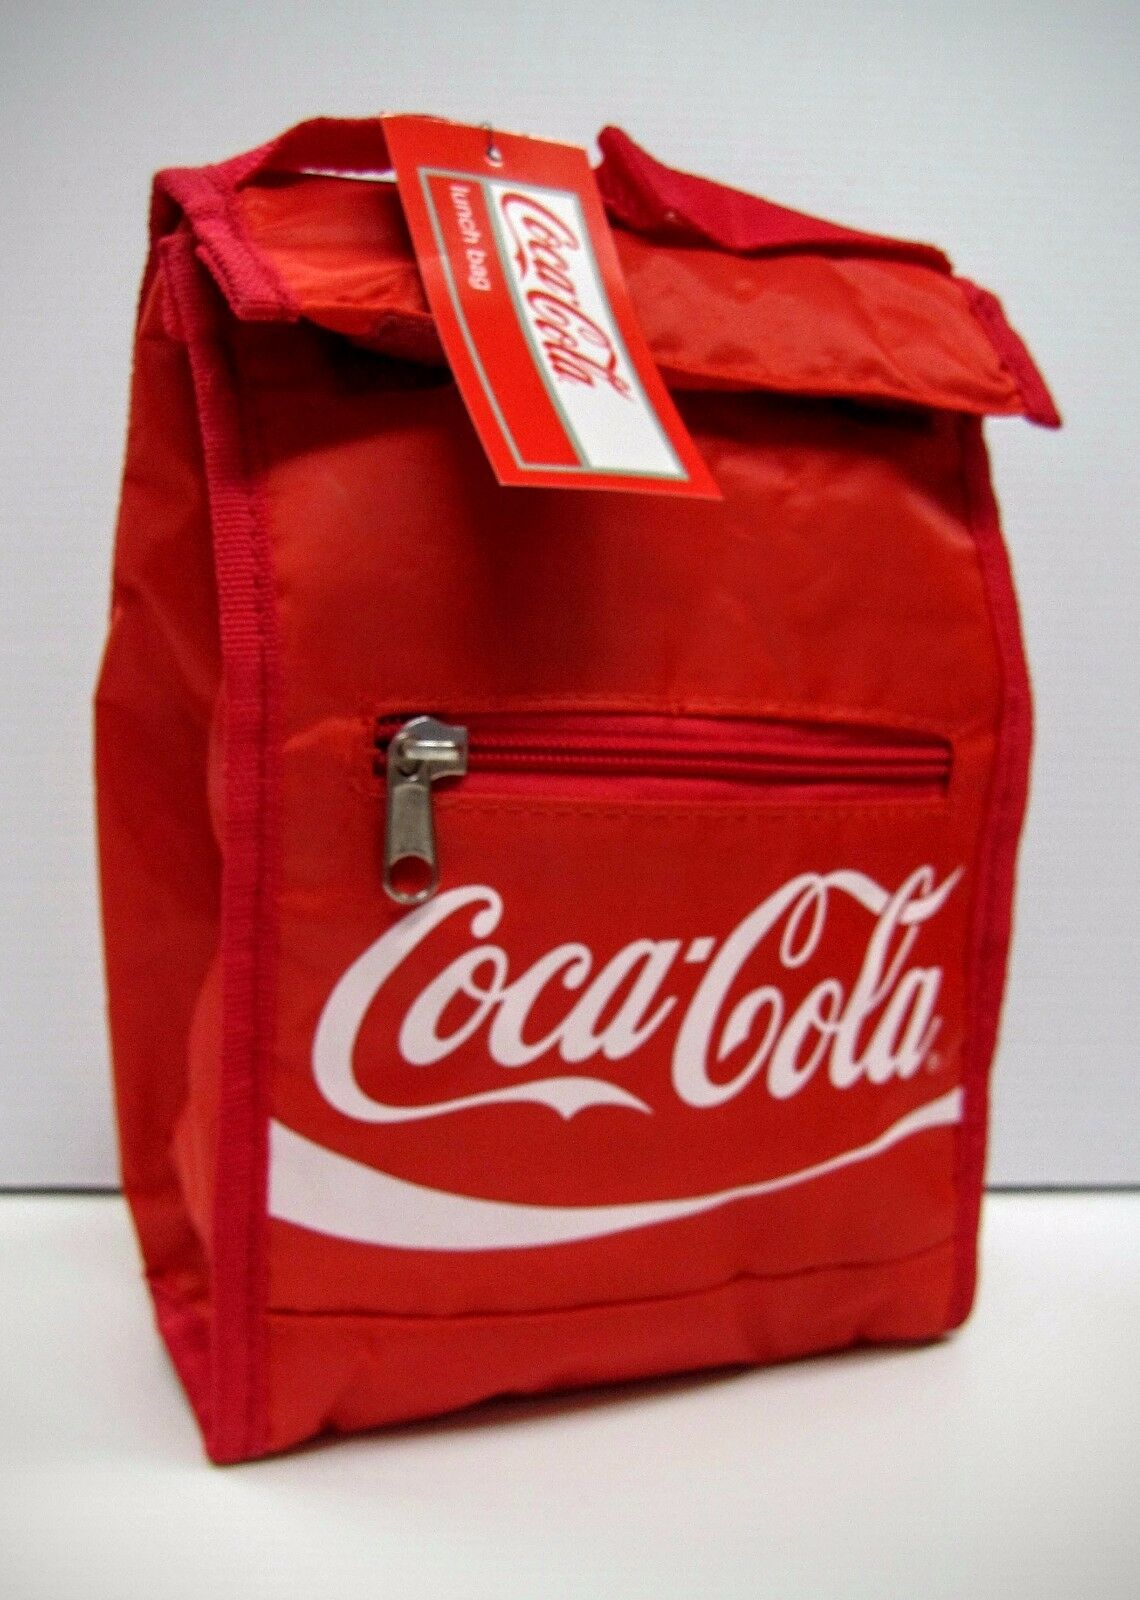 Coca-cola Lunch Bag - Free Shipping!